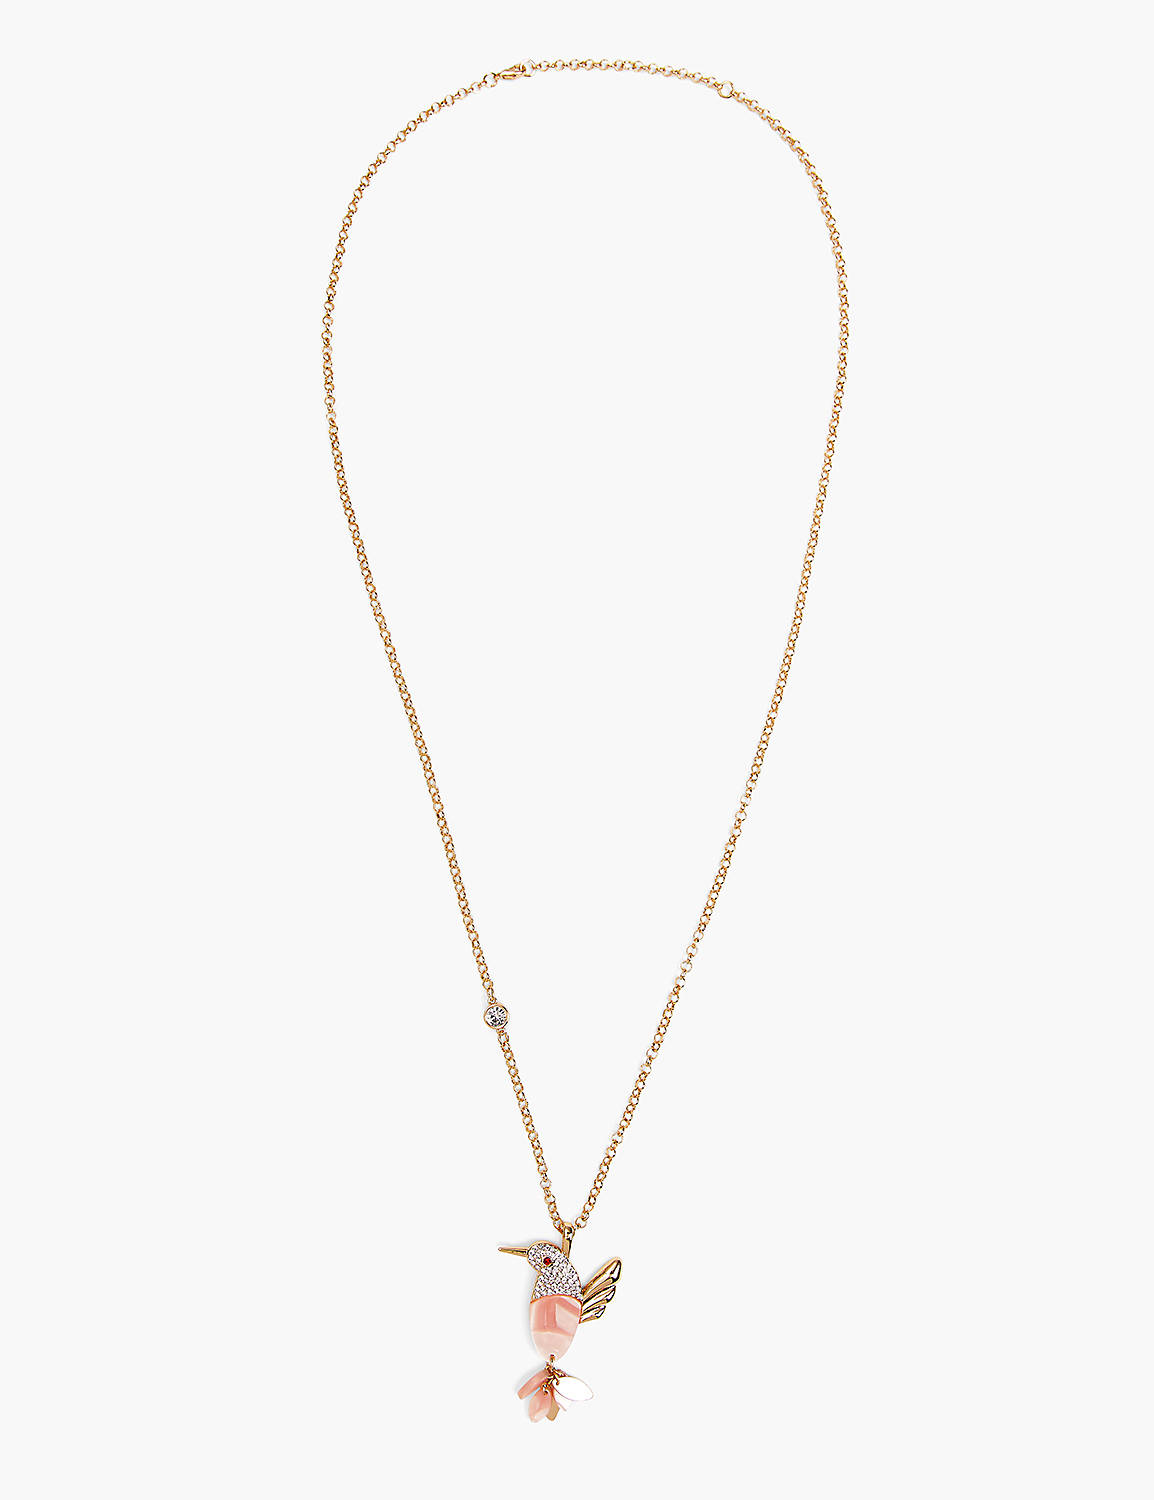 Pave Hummingbird Pendant Necklace Product Image 1